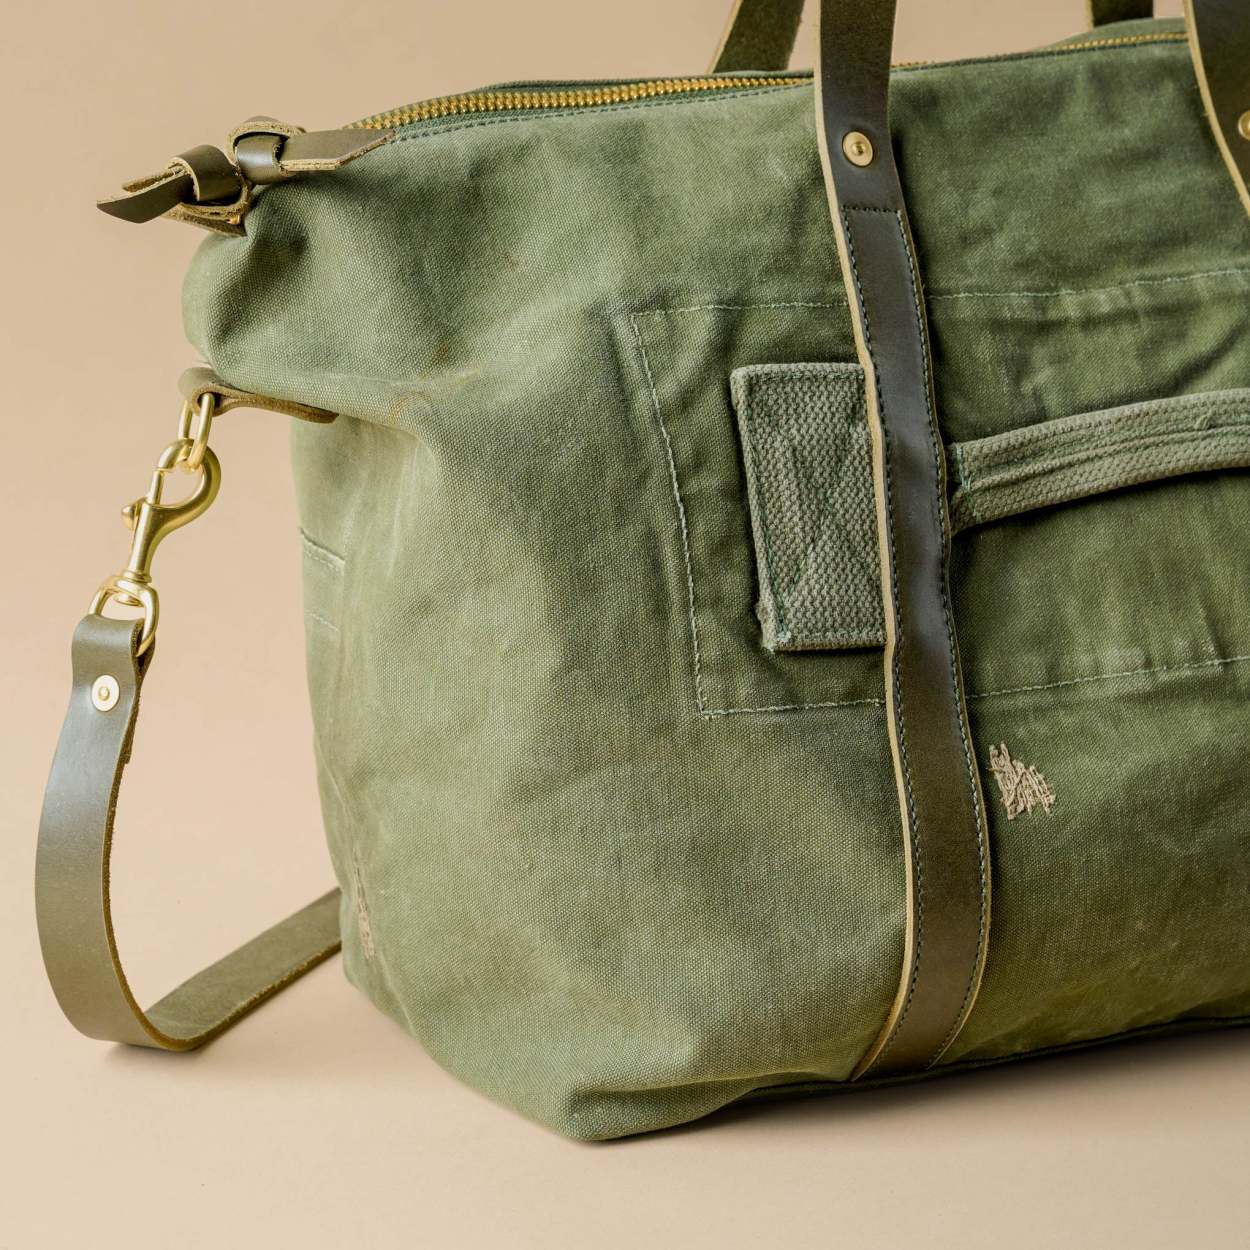 Never Usedrare Vintage Military Bag, Army Bag, Green Cotton Canvas